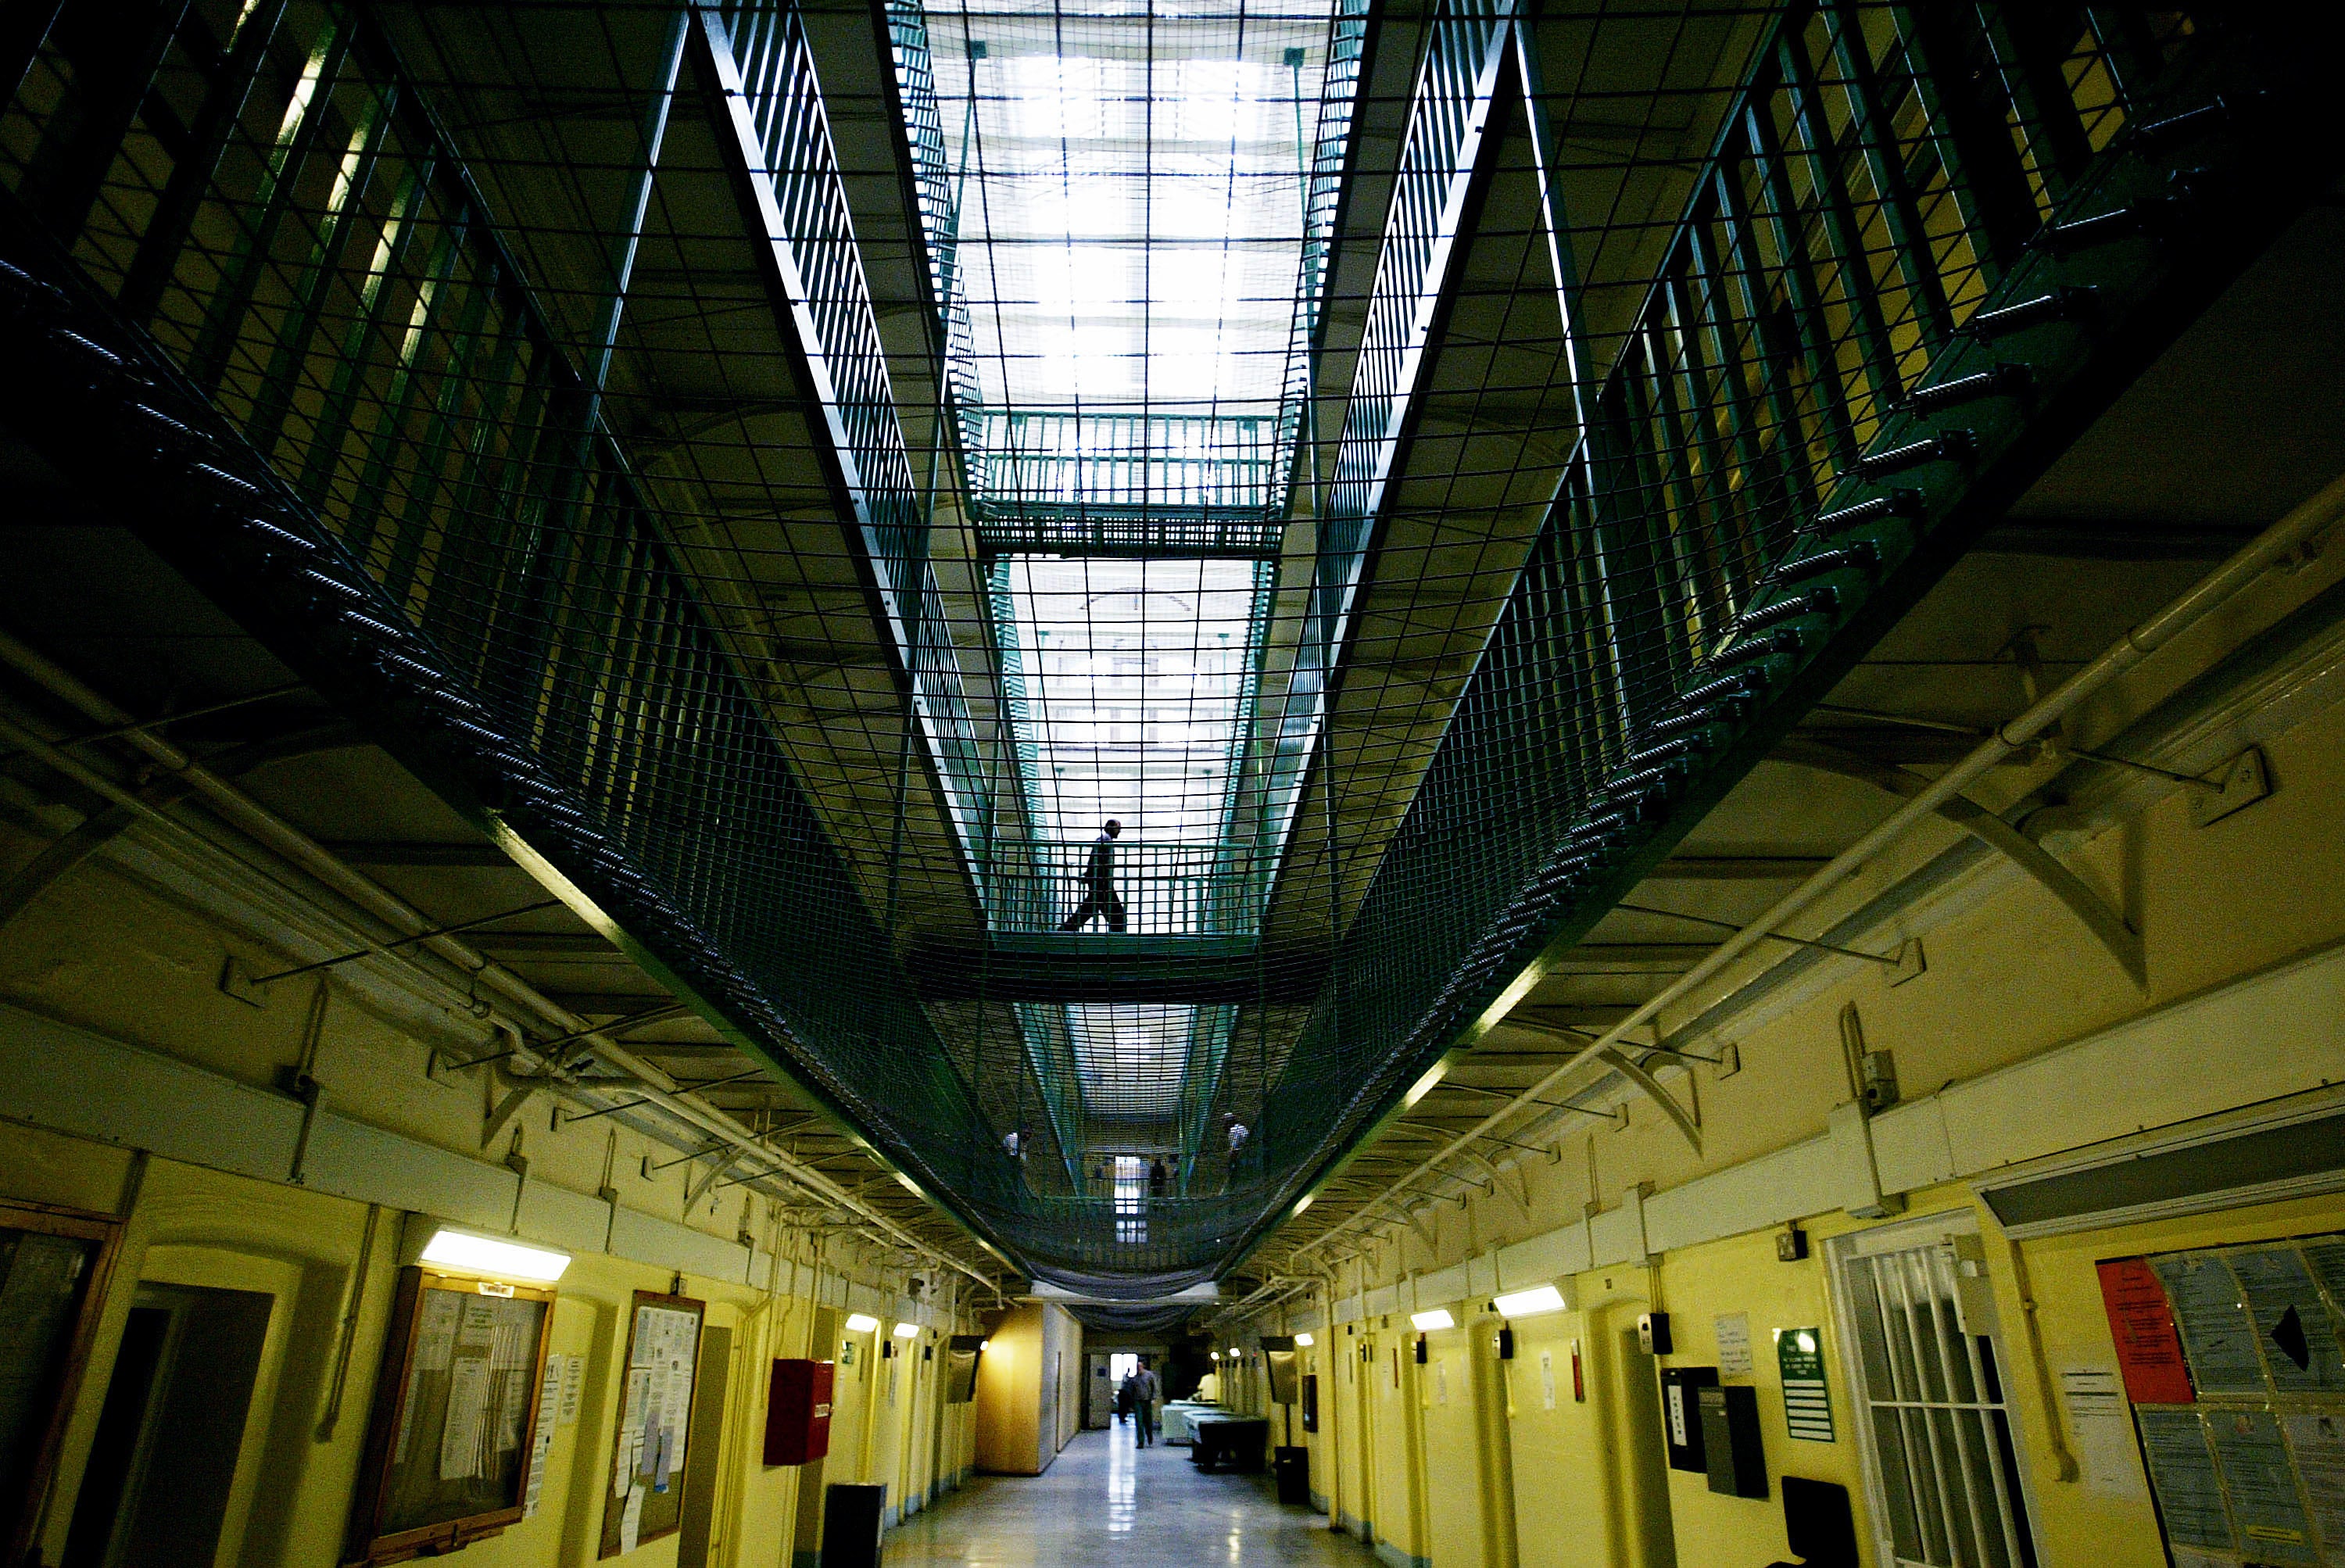 The government’s promise of six new prisons is not expected to materialise until 2030, reports suggest